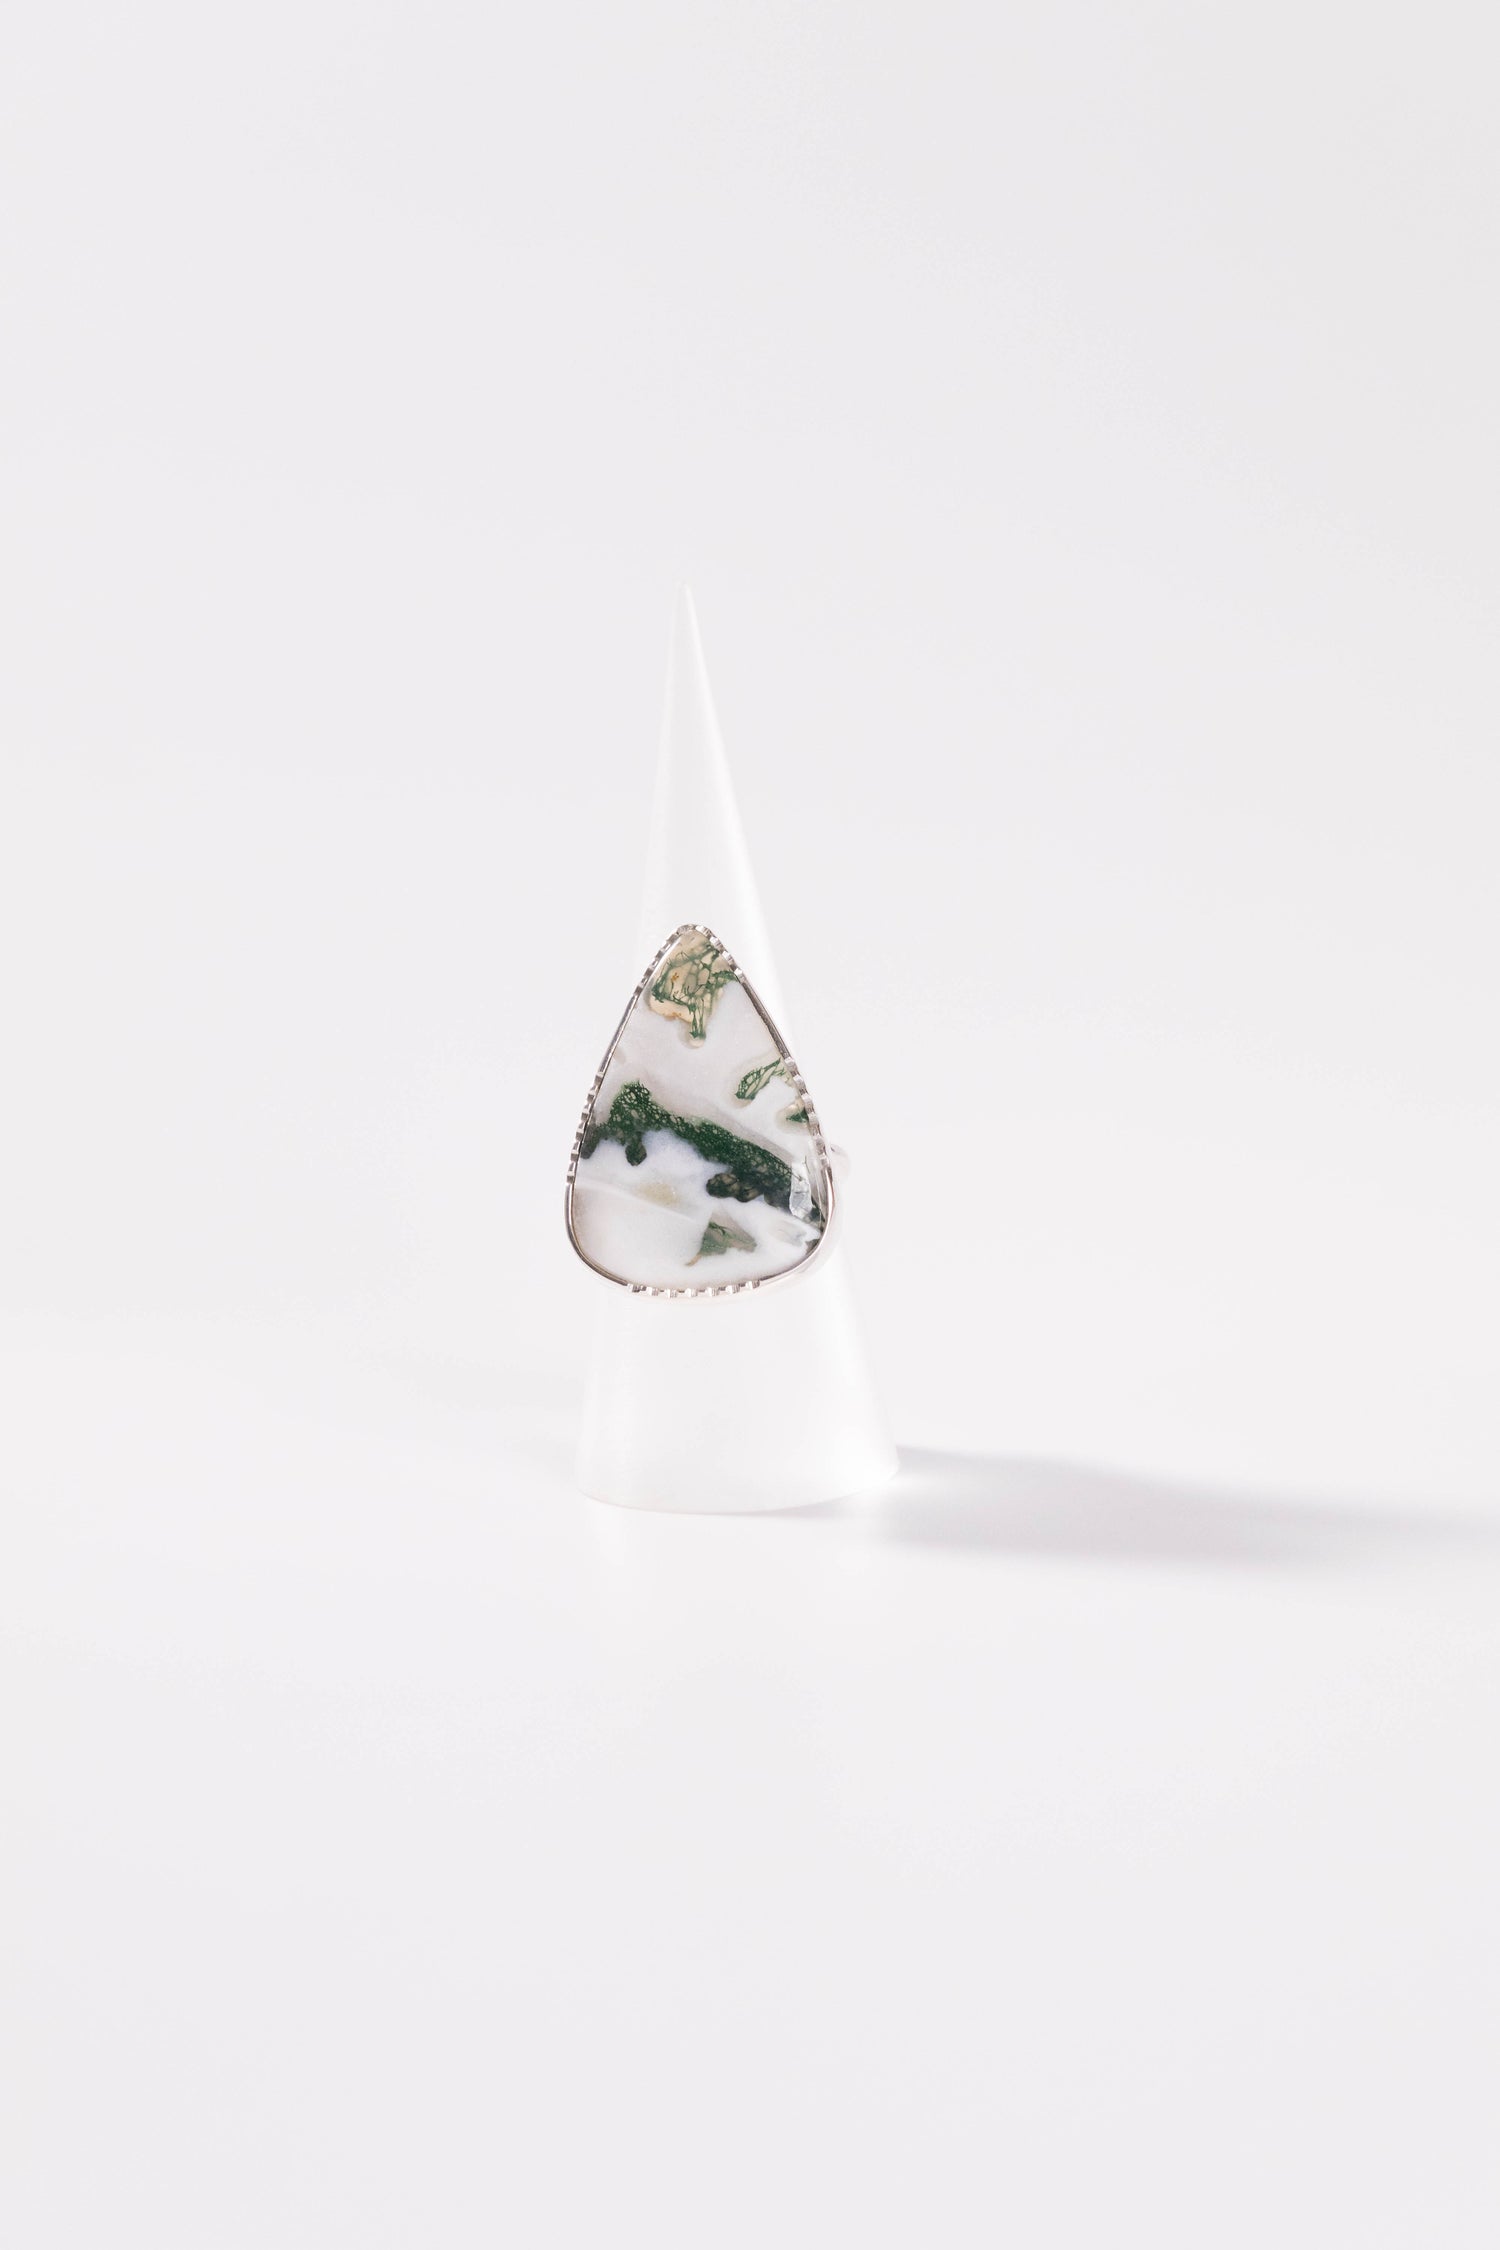 【nanan bijouxxx×StyleReborn】Together Stone Collection Ring Moss Agate